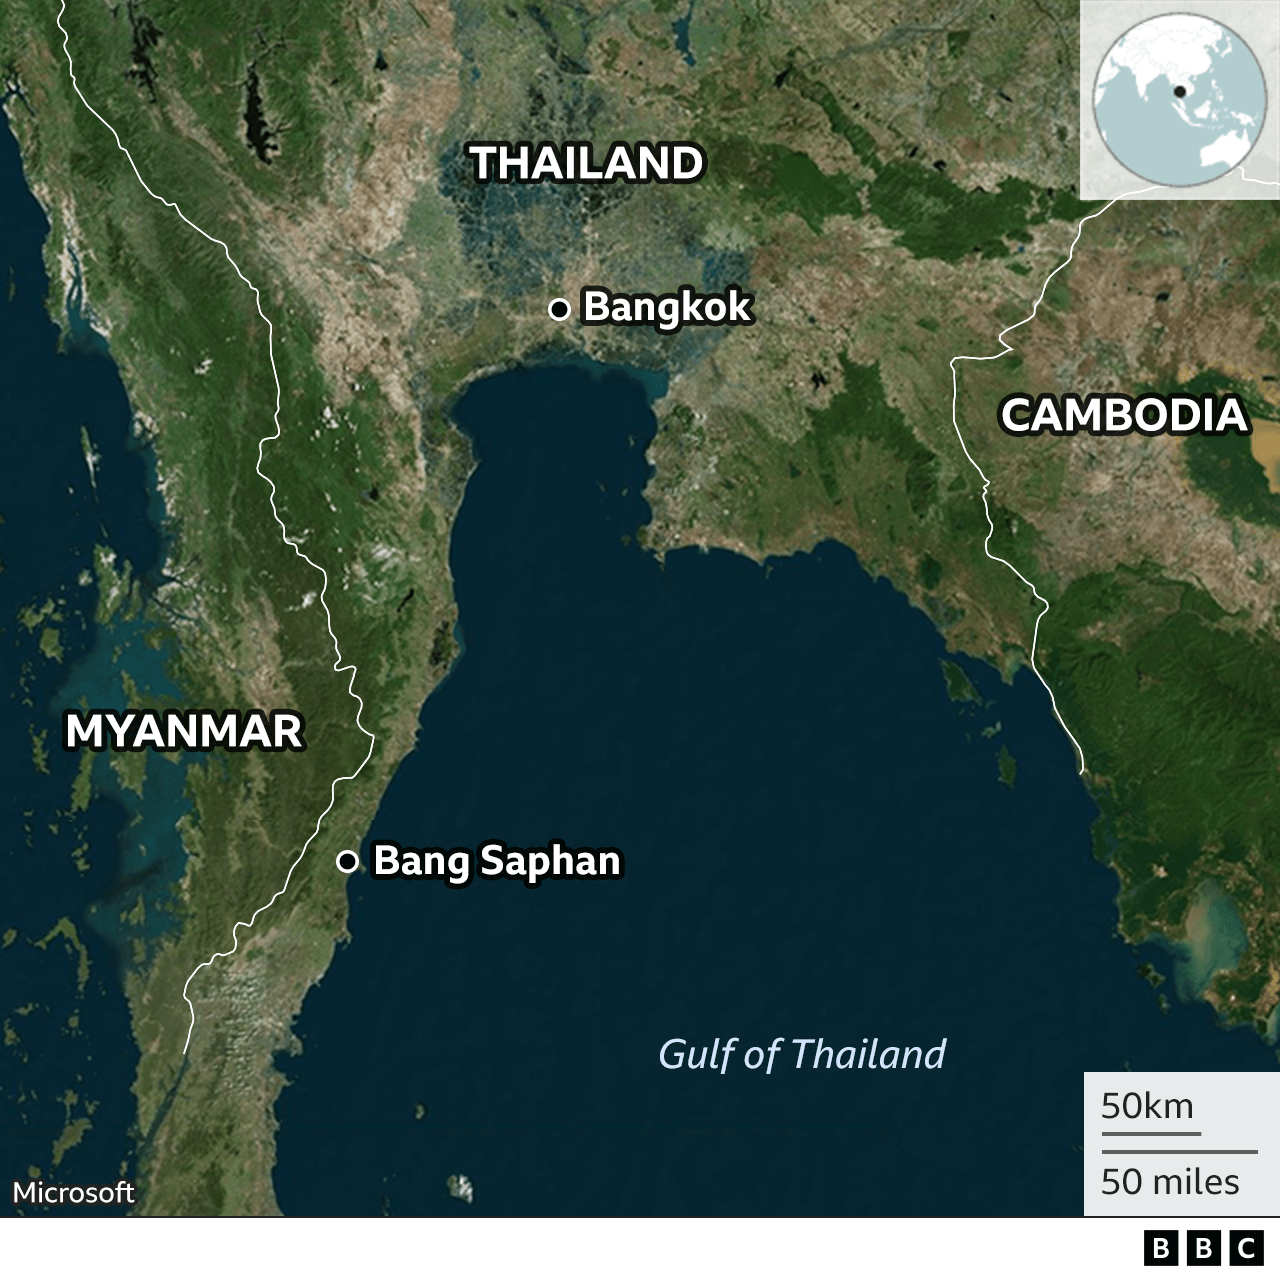 BBC map shows an area in the Gulf of Thailand where the ship capsized